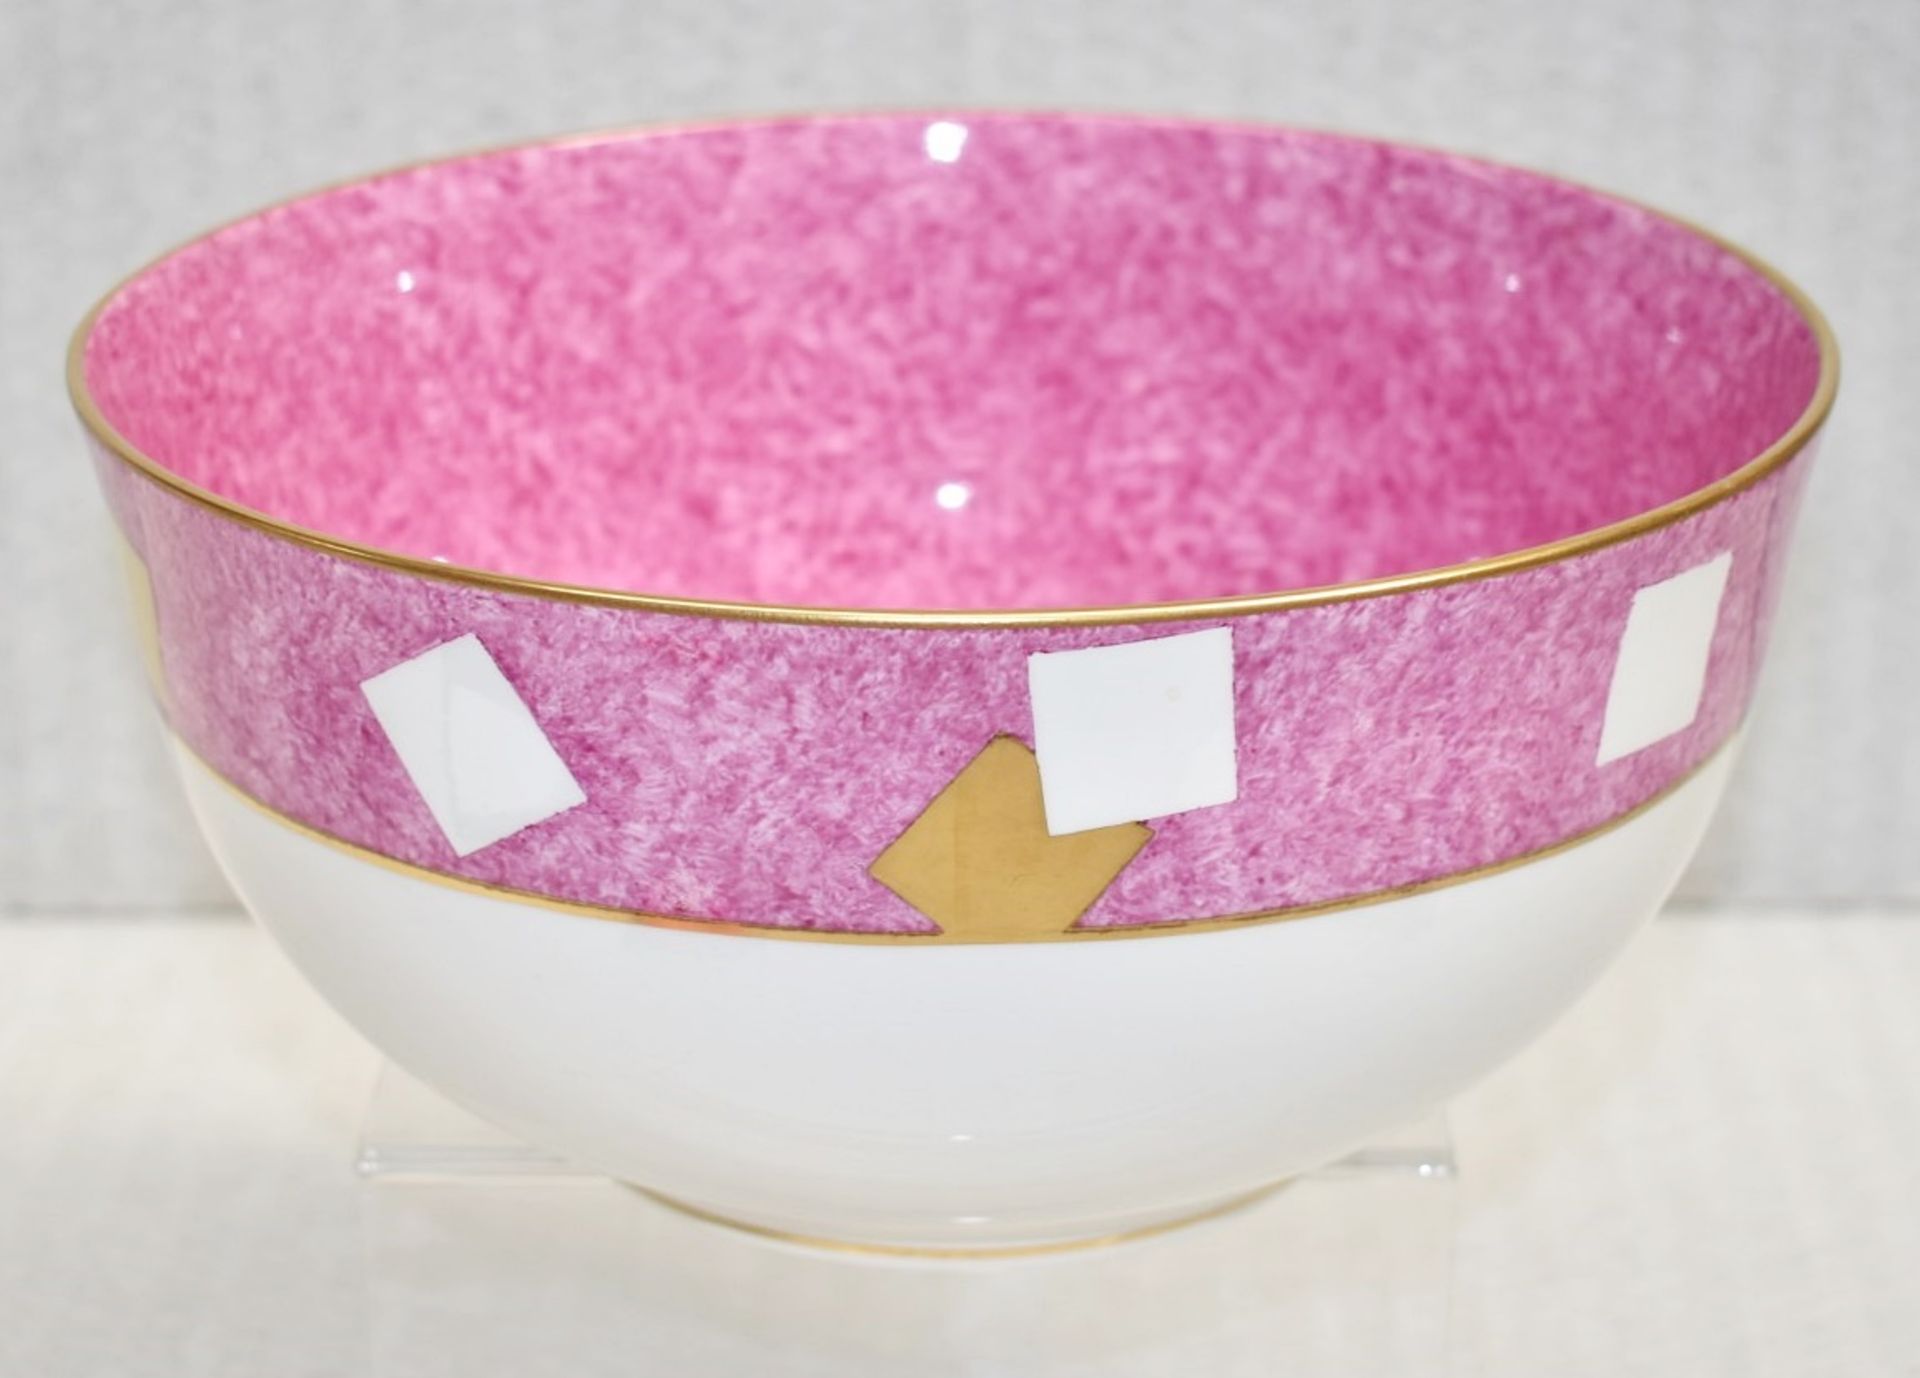 1 x TING WARE Bone China Bowl In Pink & Gold - Made In England - Ref: CNT755/WH2/C23 - CL011